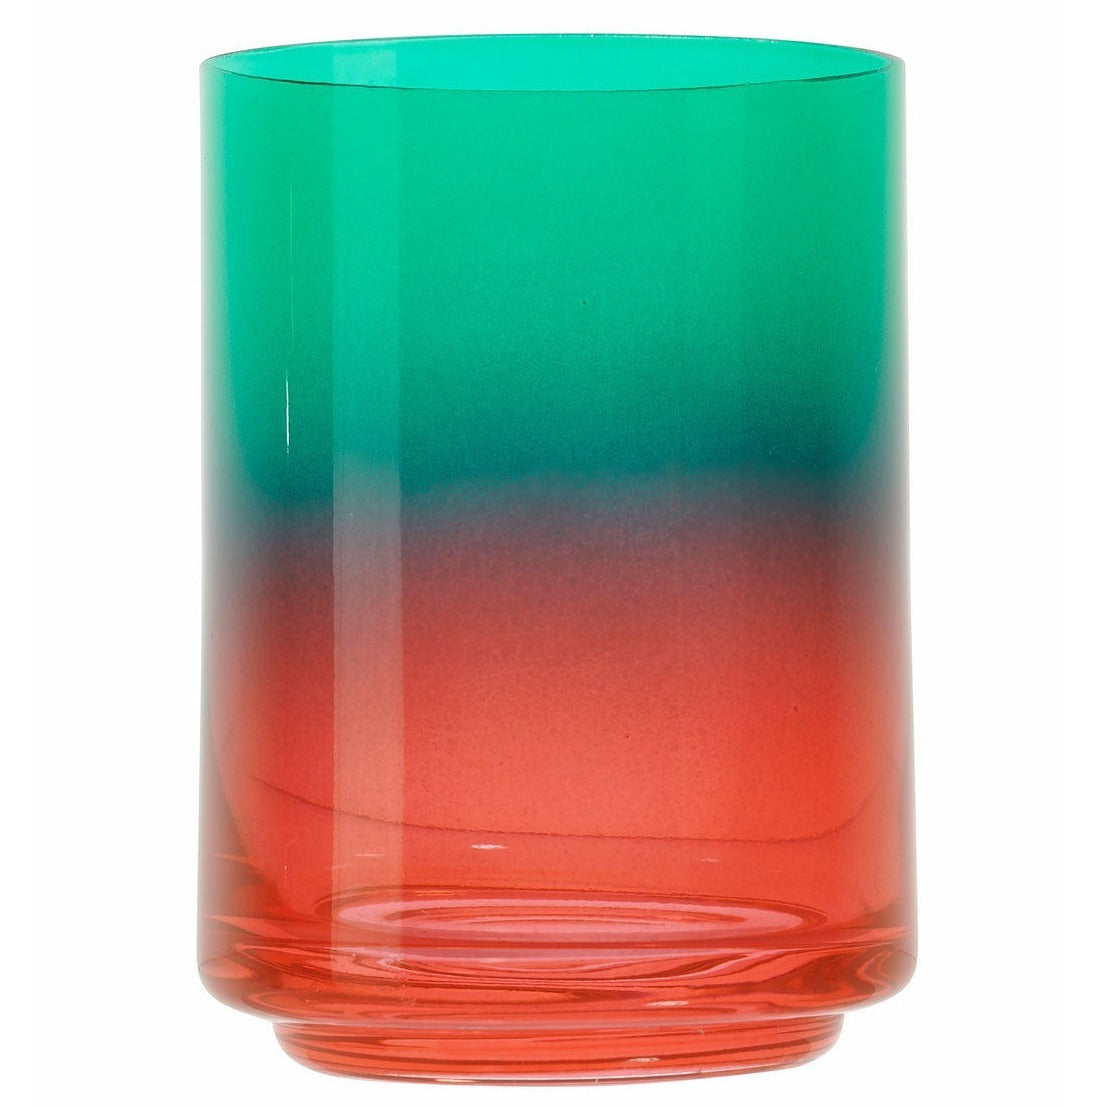 https://cdn.shopify.com/s/files/1/0837/0189/1367/products/lateral-object-gradient-glass-goa-01.jpg?v=1698052091